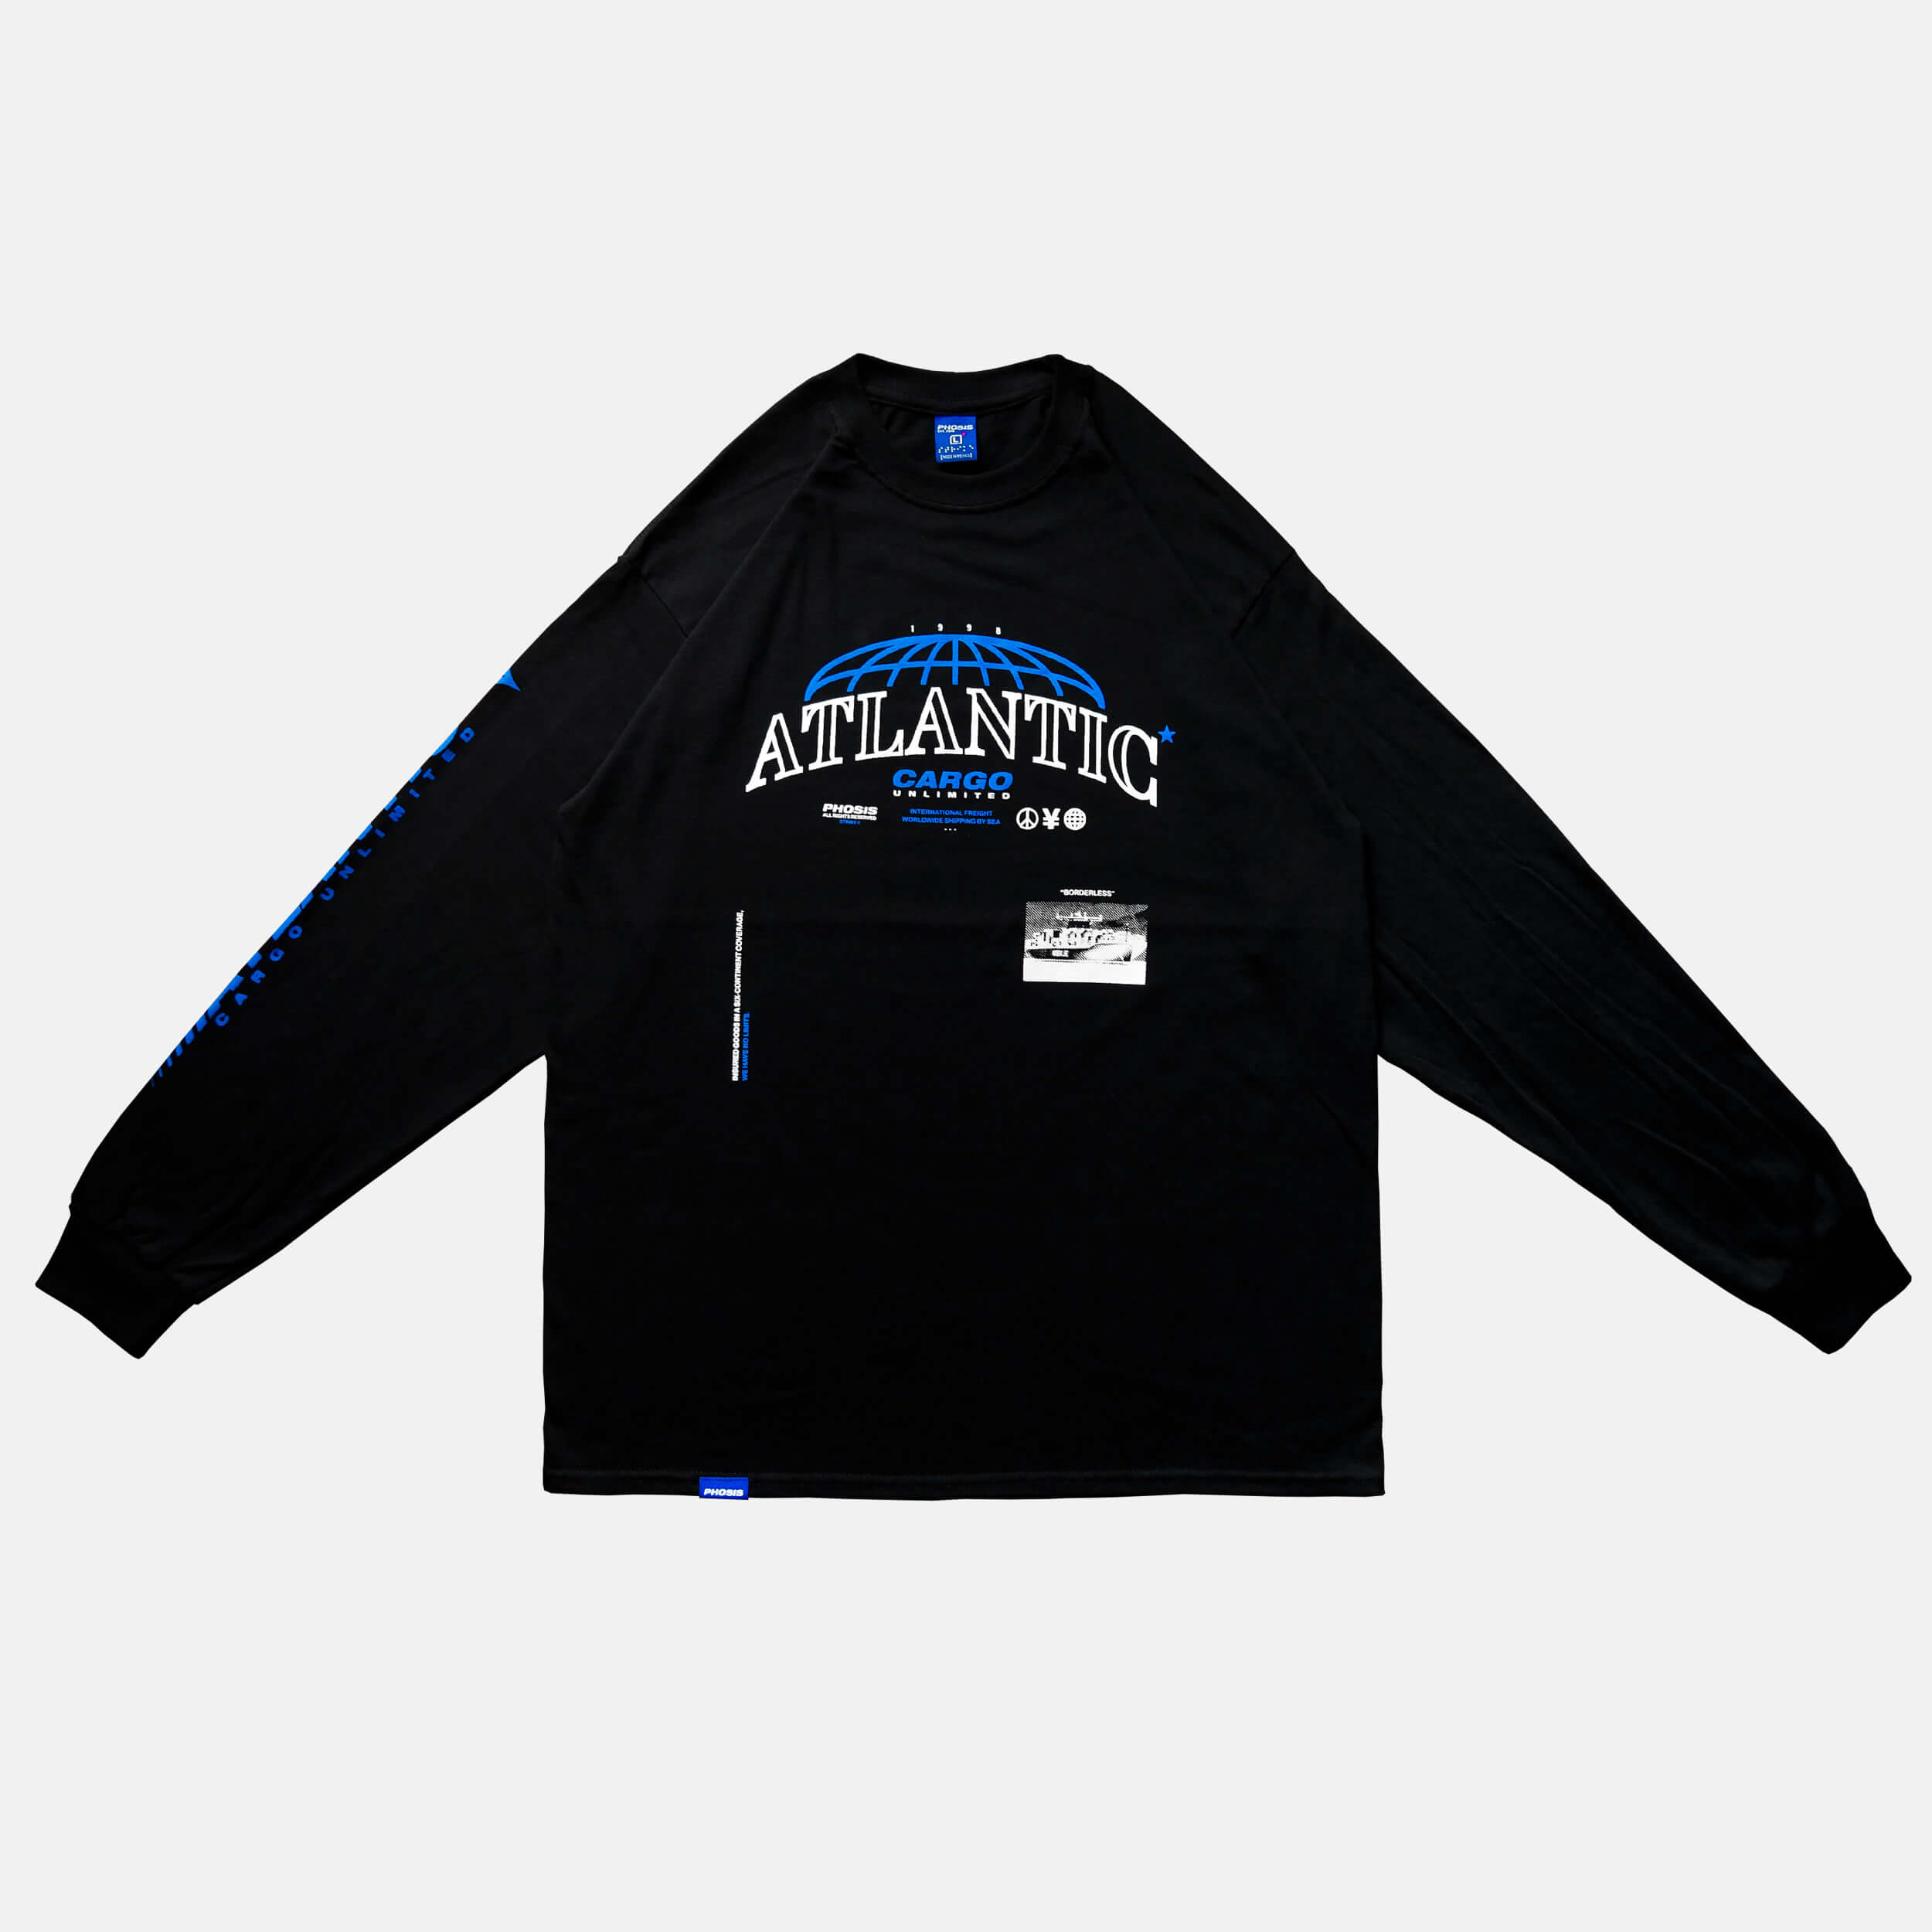 Front view of the screen-pinted ATLANTIC black long sleeve from PHOSIS Clothing